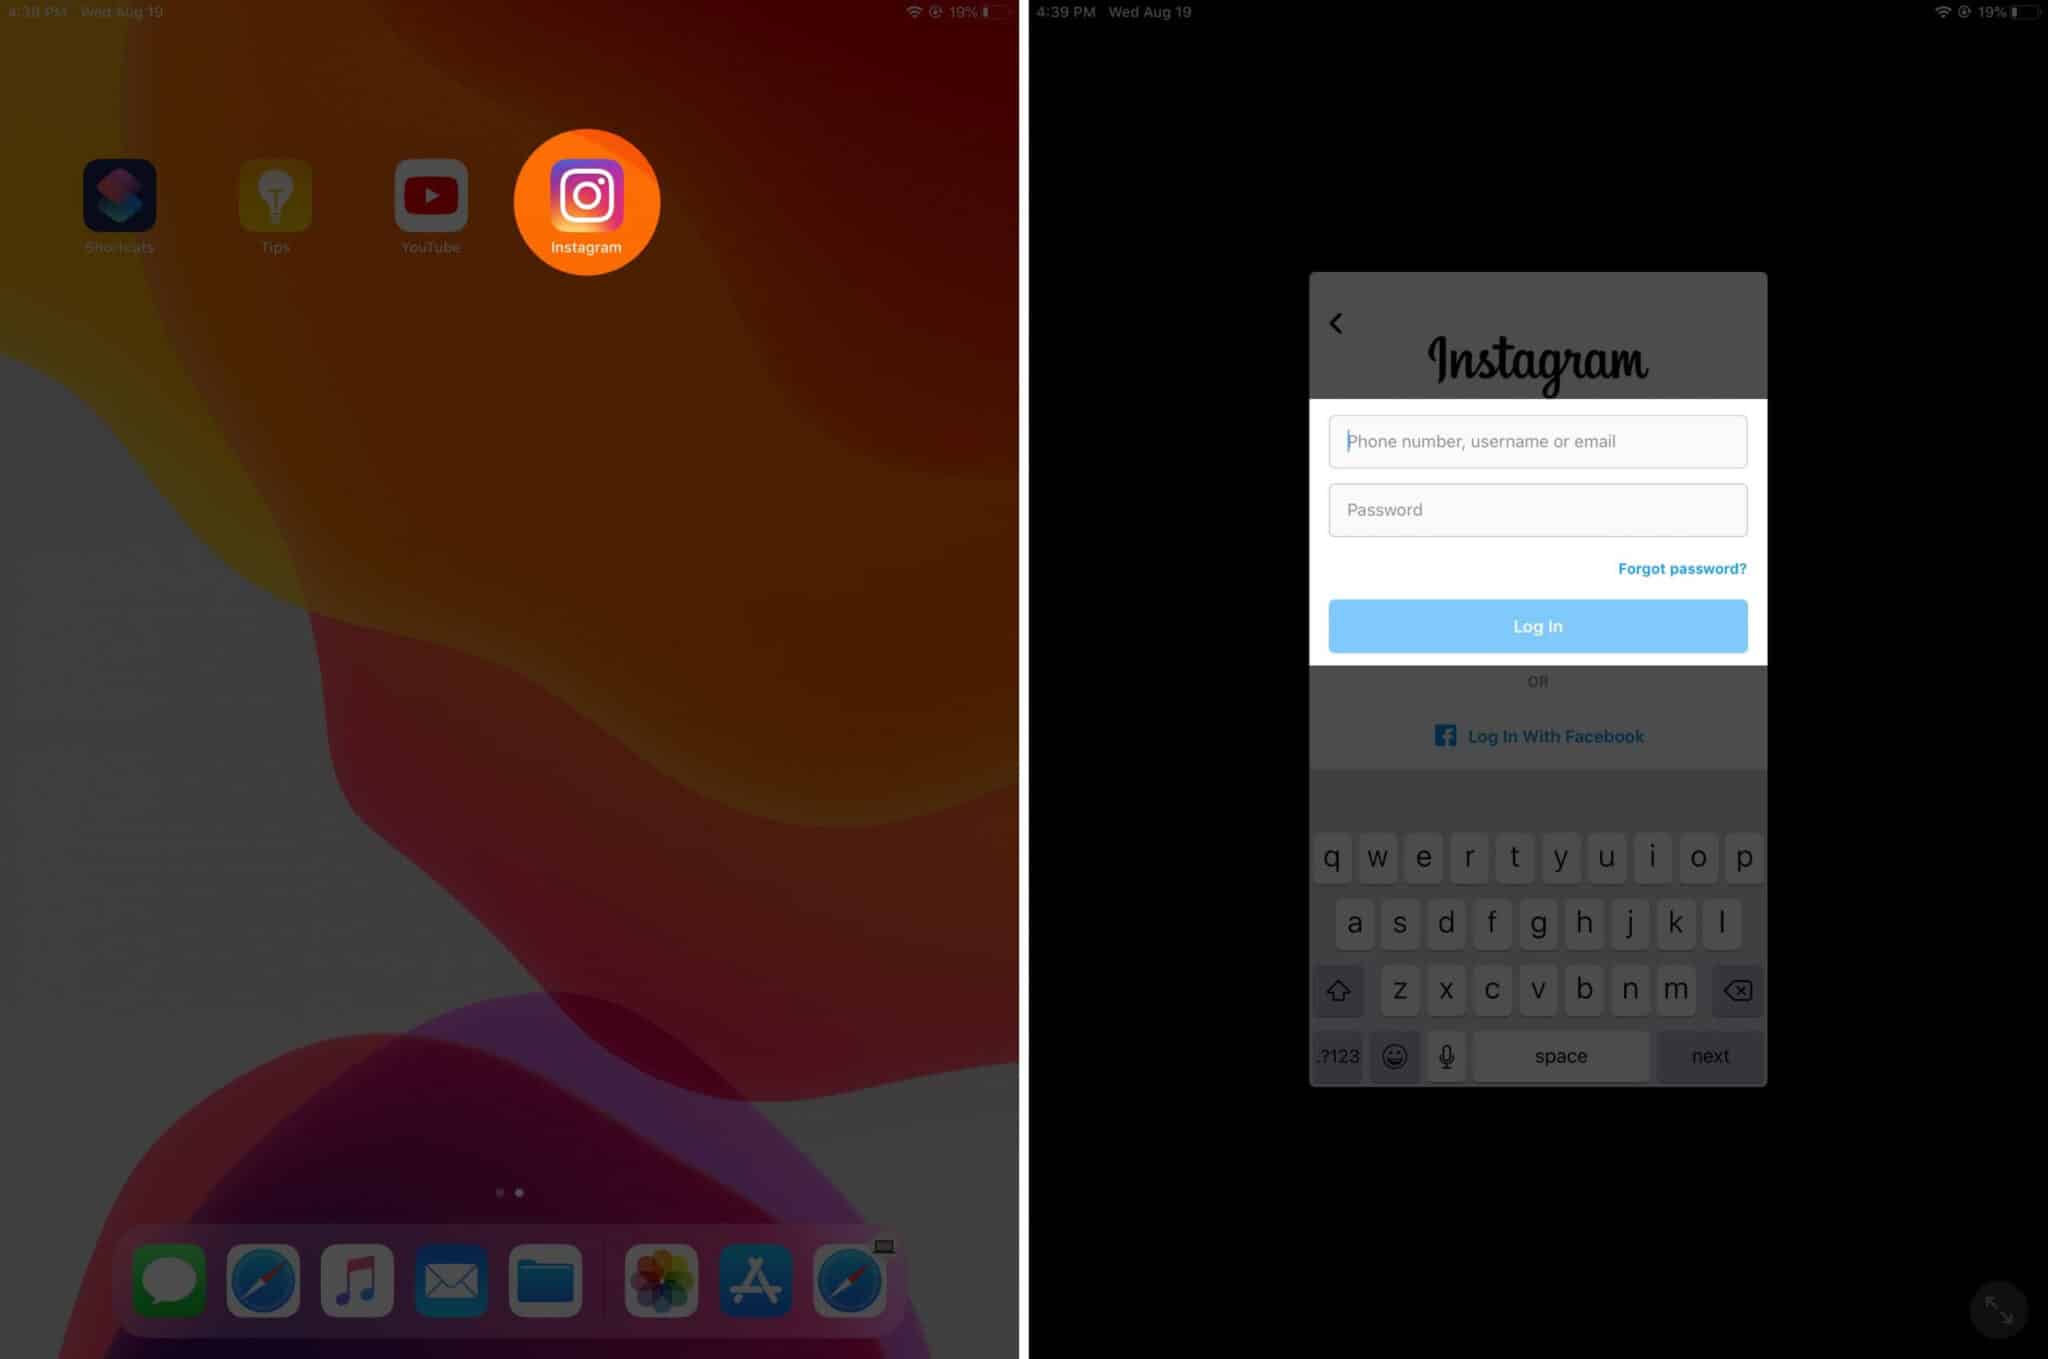 open instagram app and login to your account on ipad